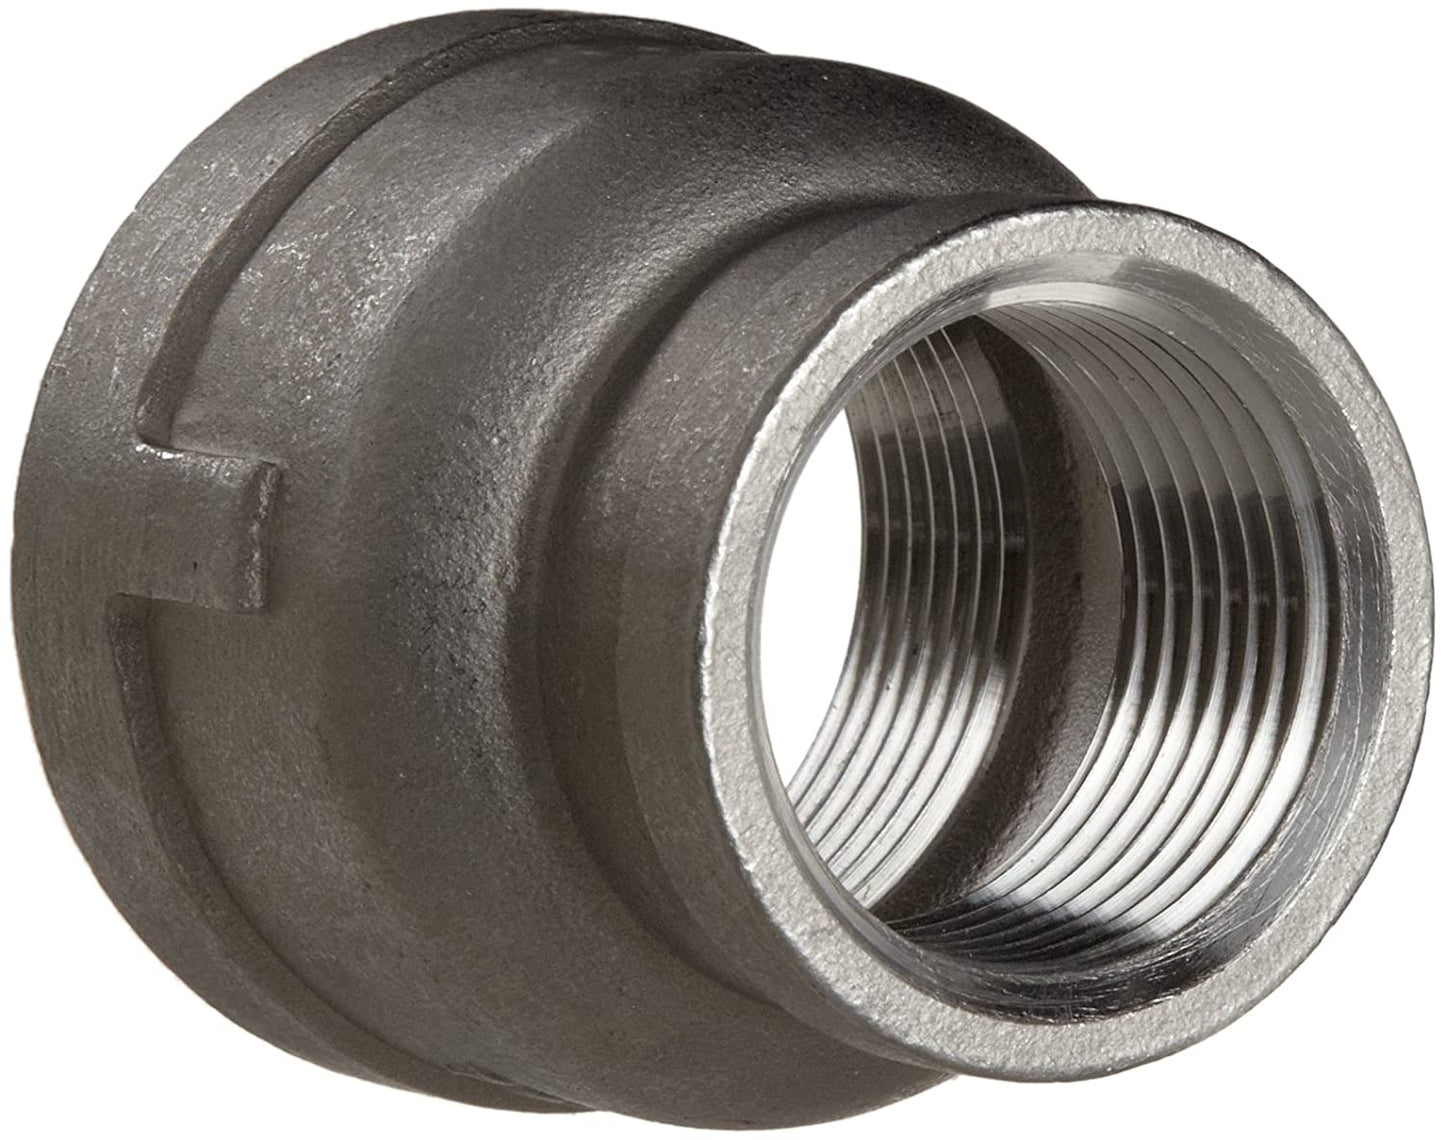 K612-2416 - 1-1/2" x 1" Threaded Reducing Coupling, 316 Stainless Steel